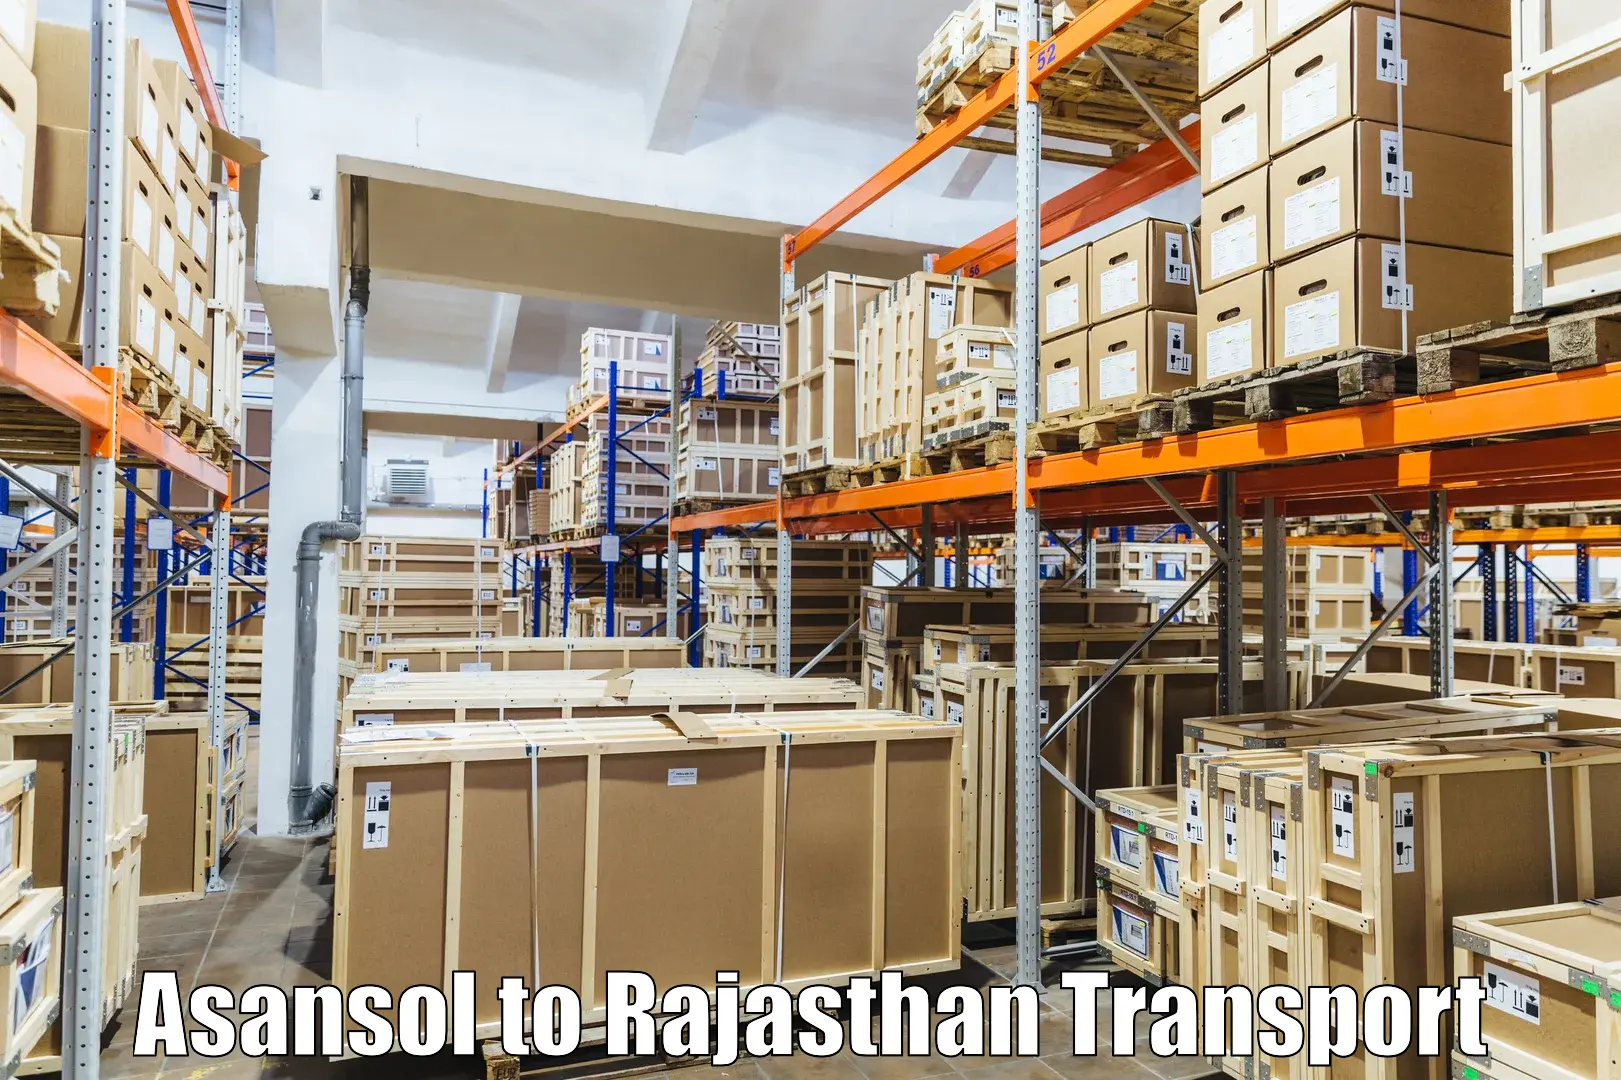 Vehicle transport services Asansol to Balotra